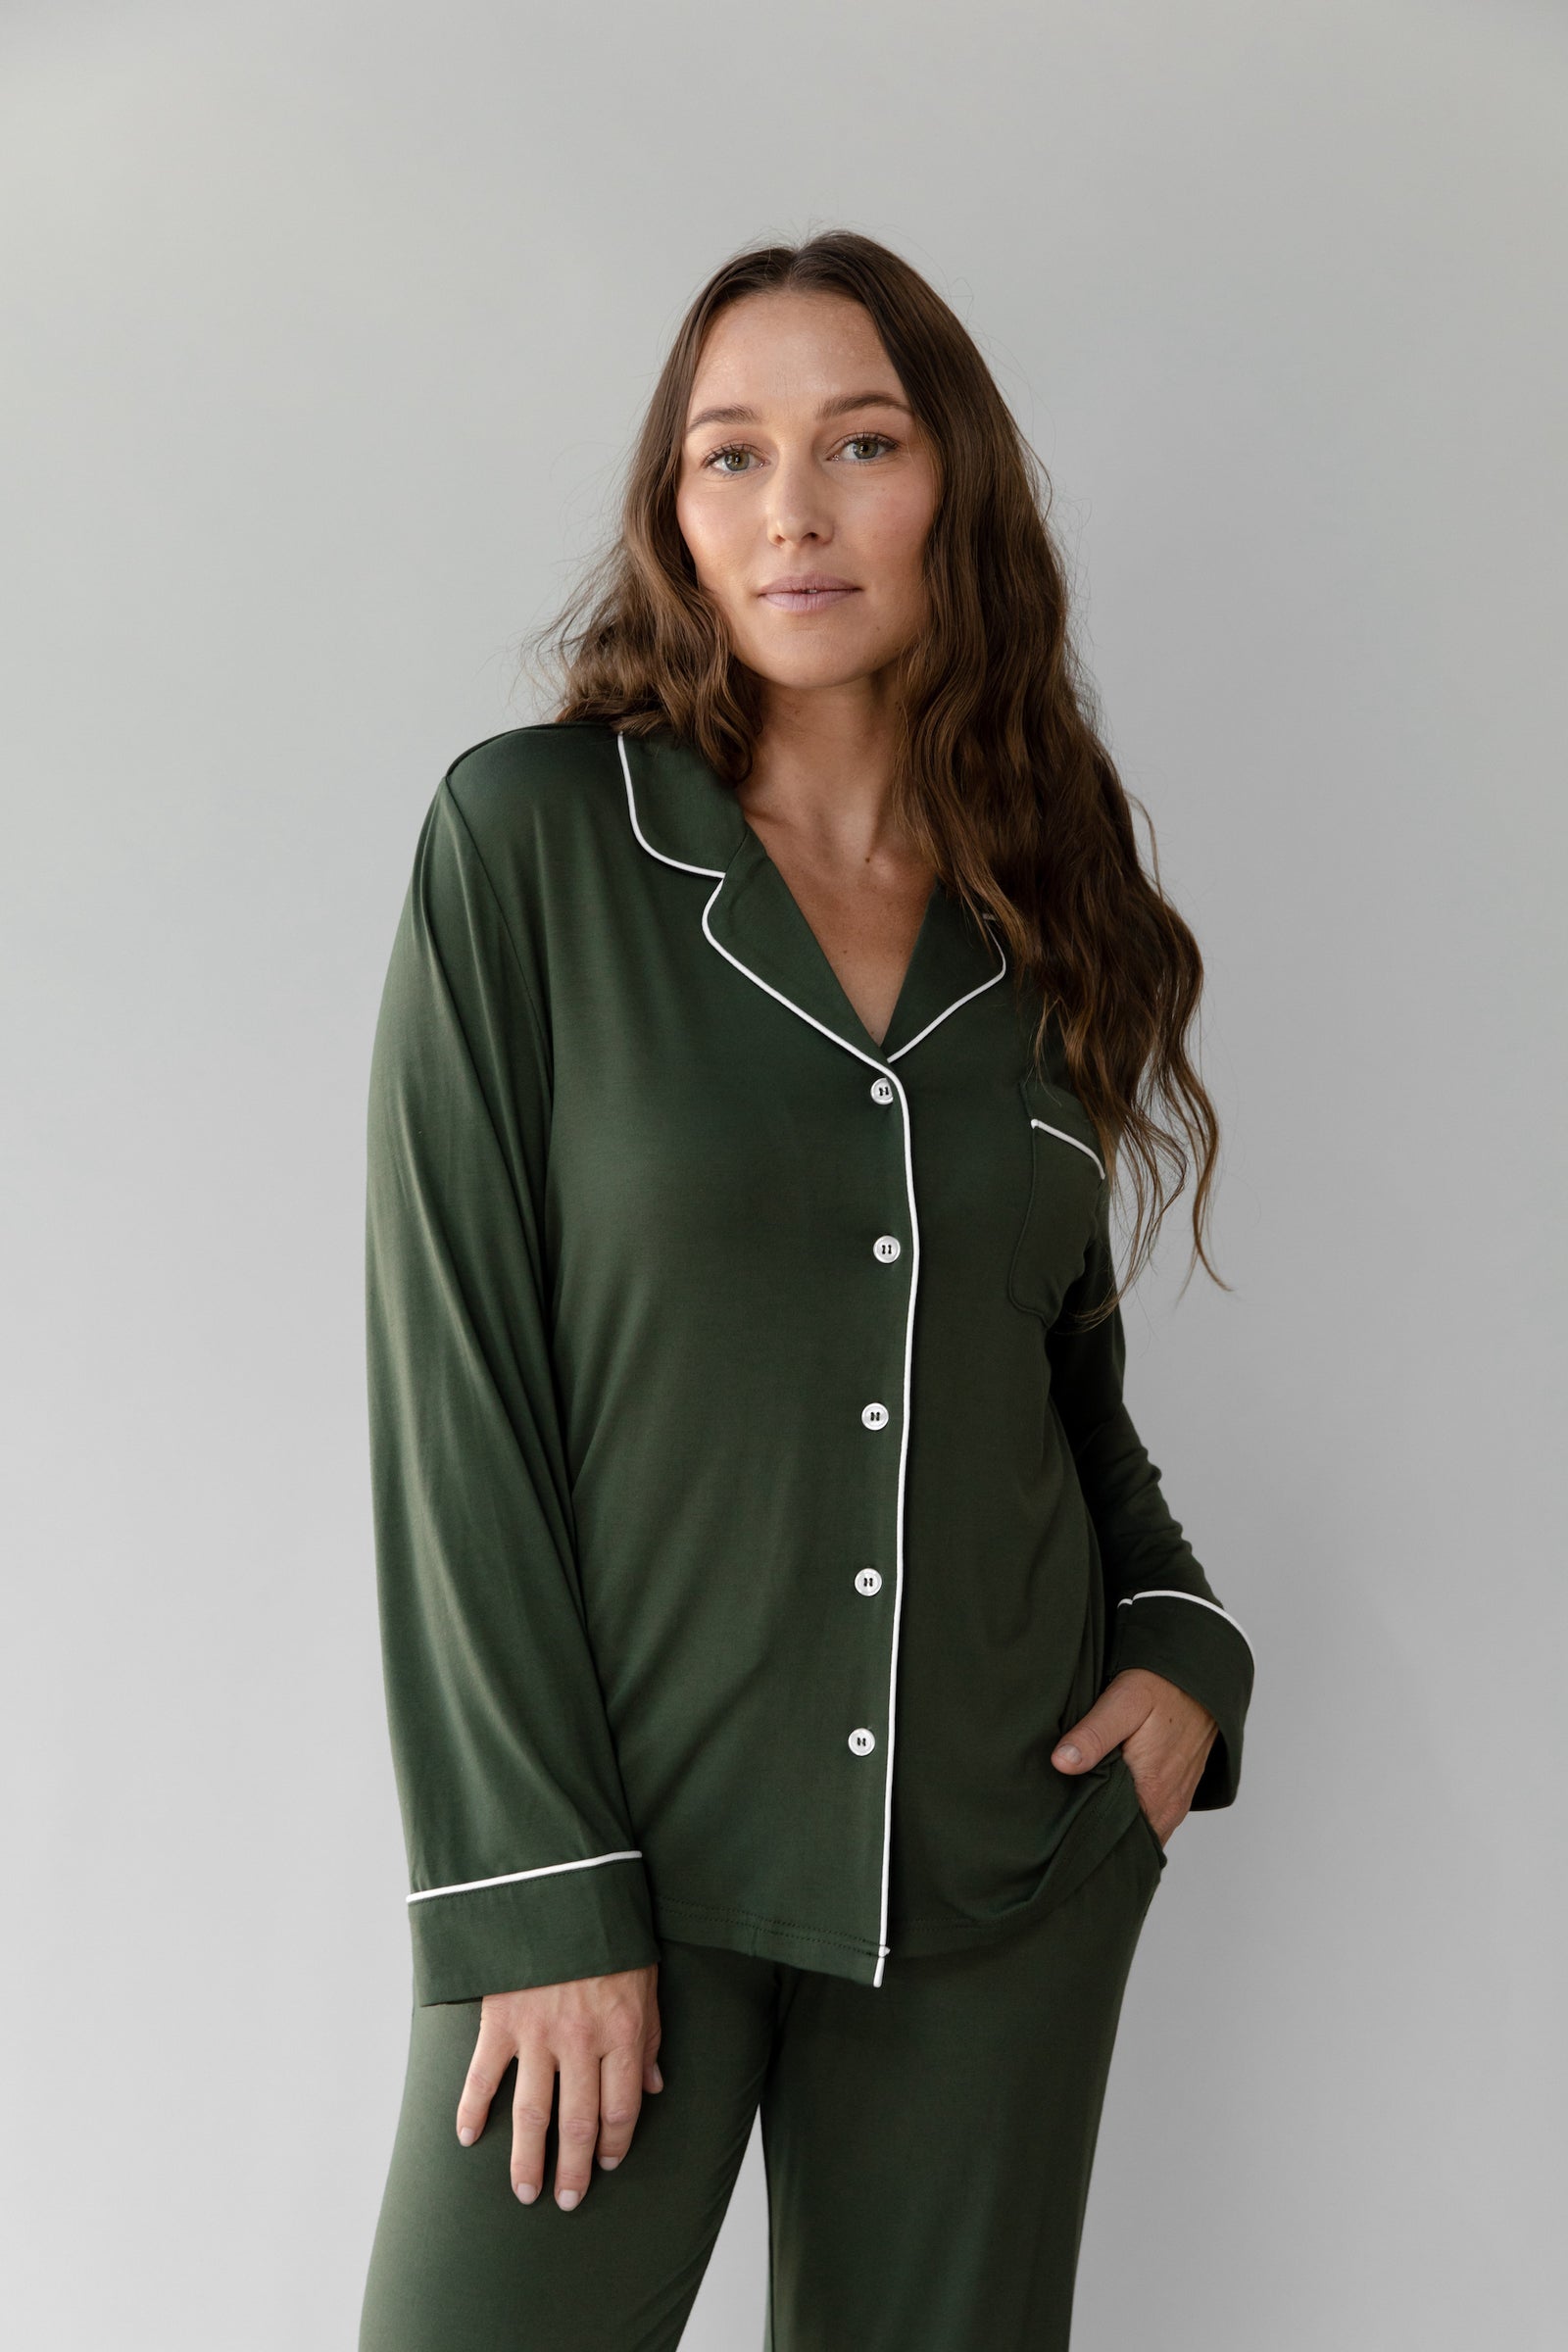 Olive Long Sleeve Pajama Set modeled by a woman. The photo was taken in a high contrast setting, showing off the colors and lines of the pajamas. 